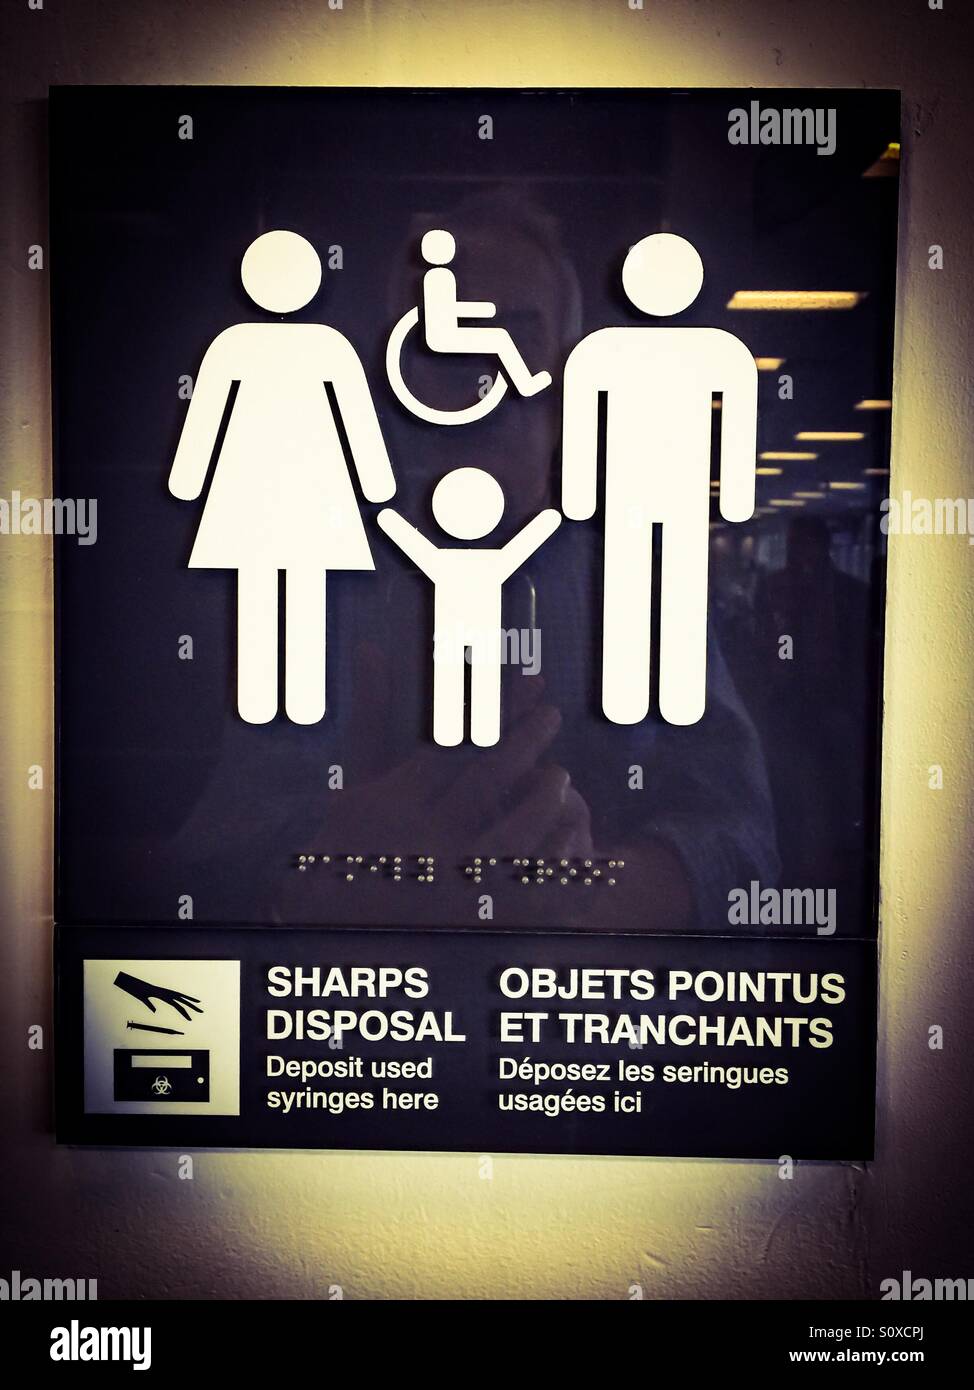 All inclusive washroom sign, all genders, children, grownups, bilingual, Braille readable, needle disposal Stock Photo